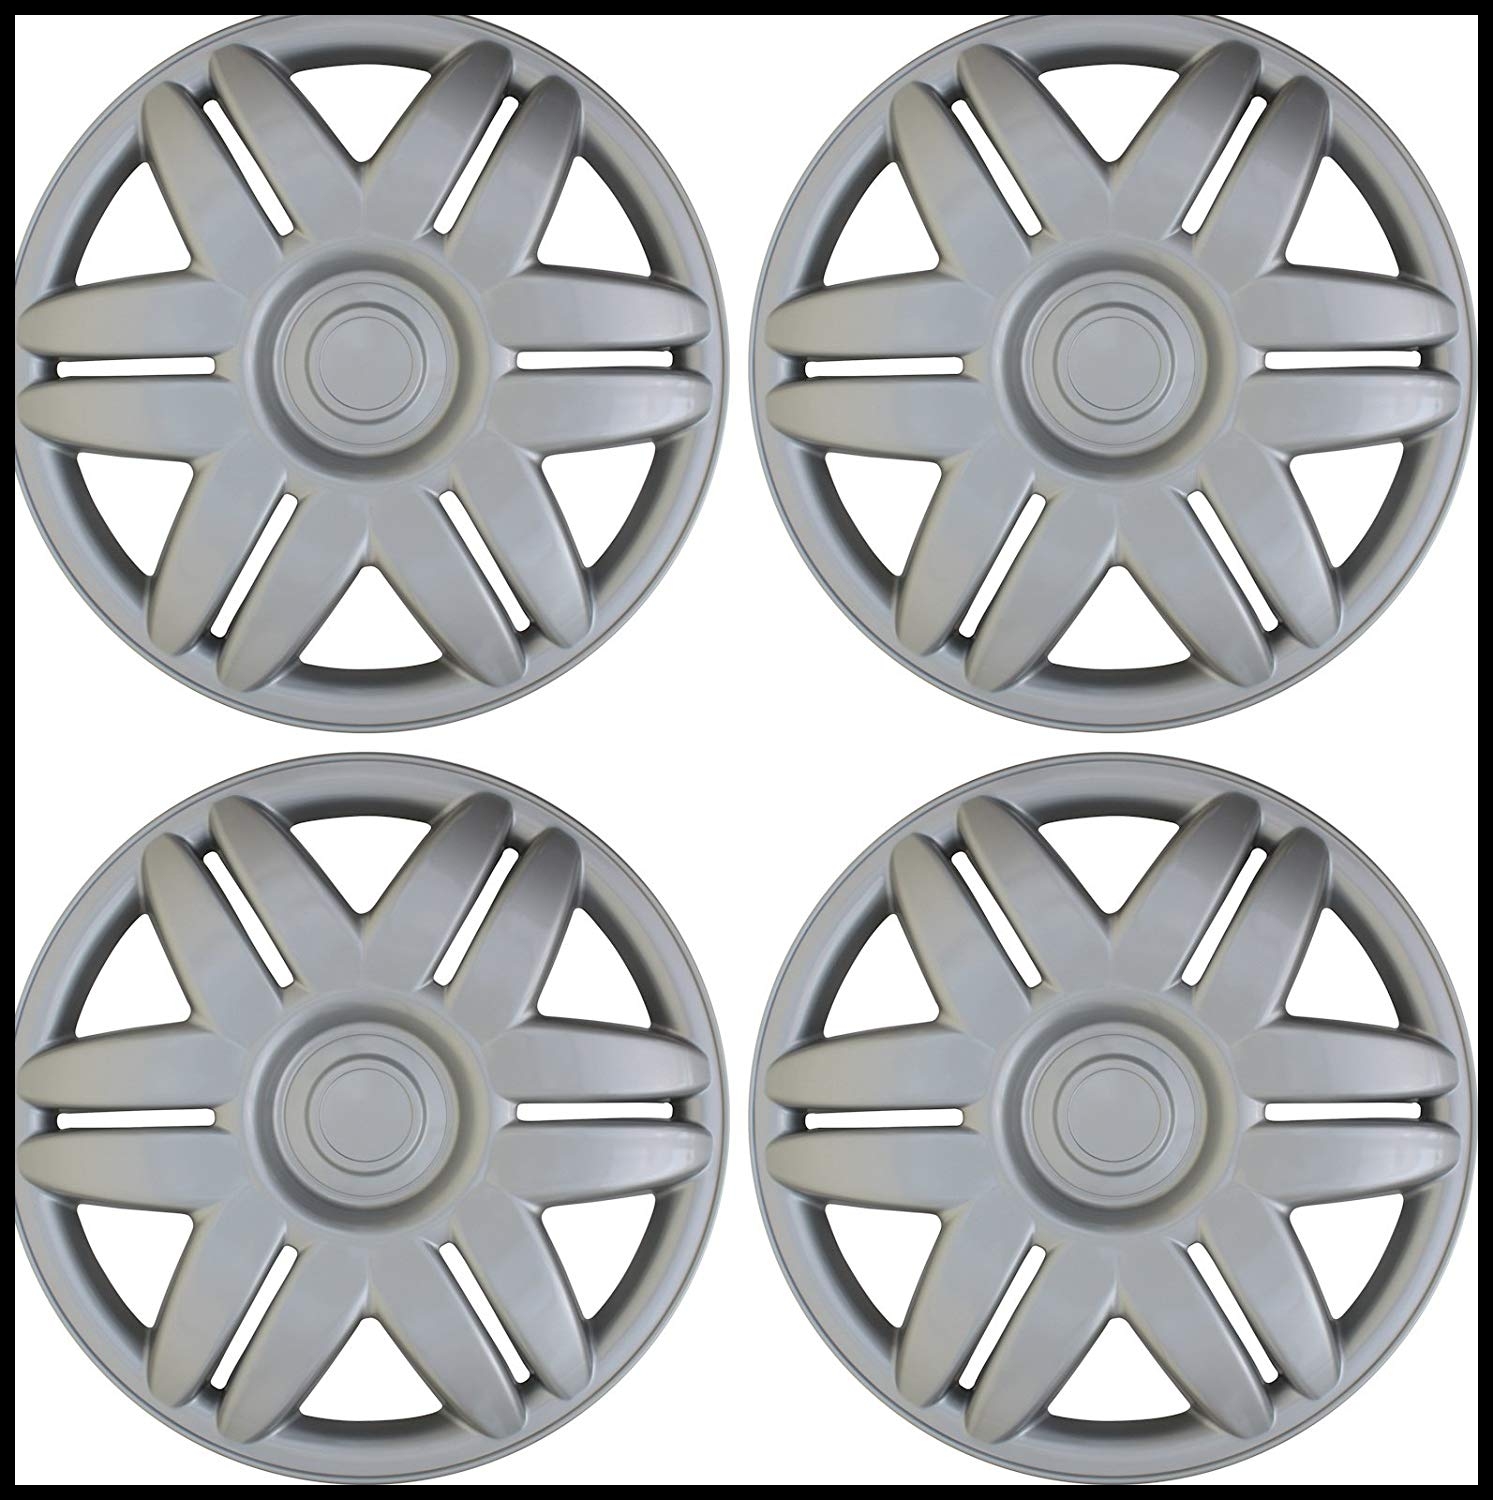 Amazon 15" Set of 4 Hubcaps 2000 2001 Toyota Camry Wheel Covers Design Are Universal Hub Caps Fit Most 15 Inch Wheels Automotive